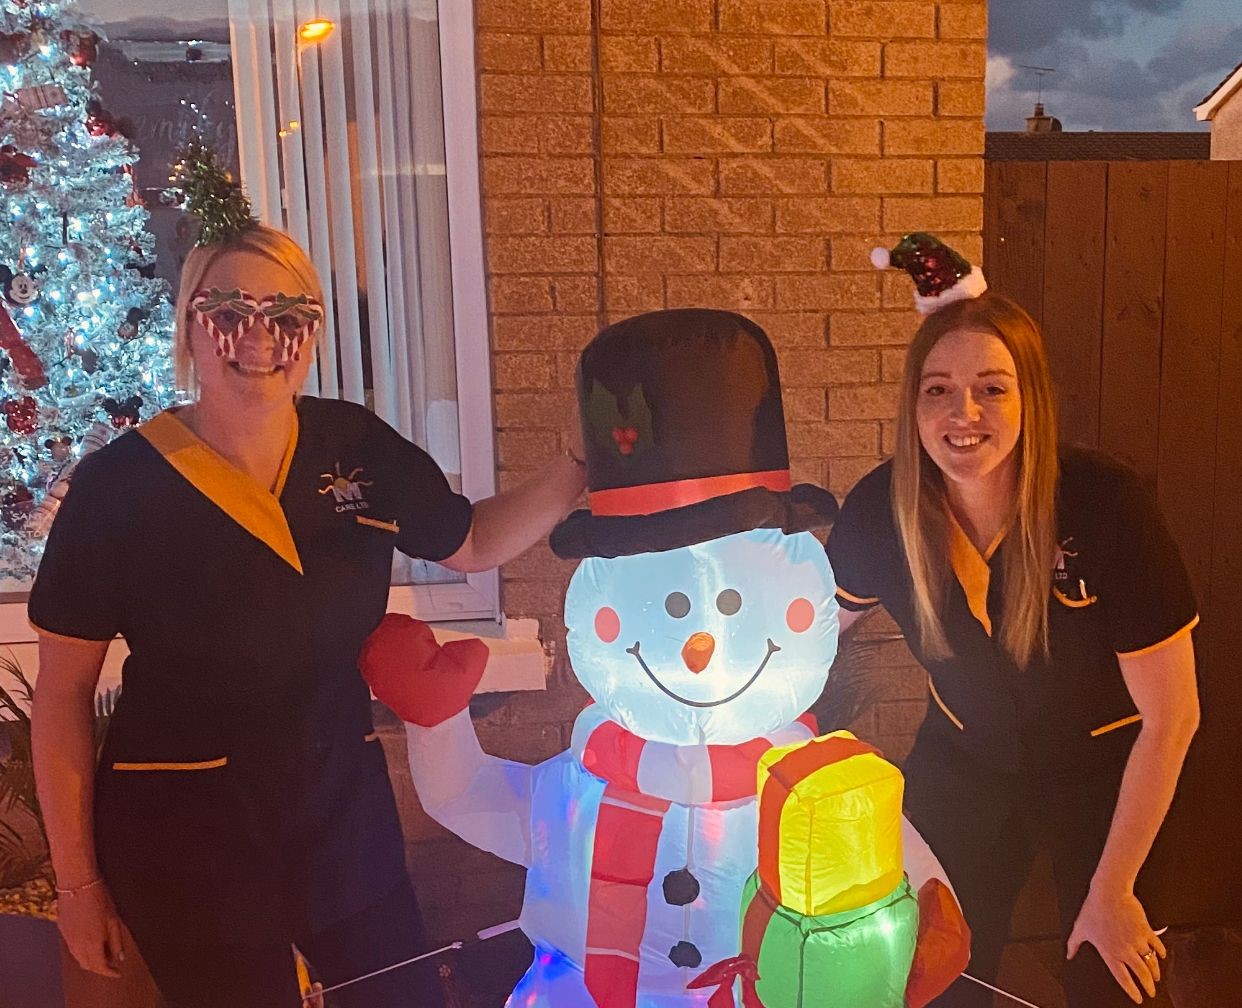 Community Care – Christmas is a time for family, and we take great care in looking after yours